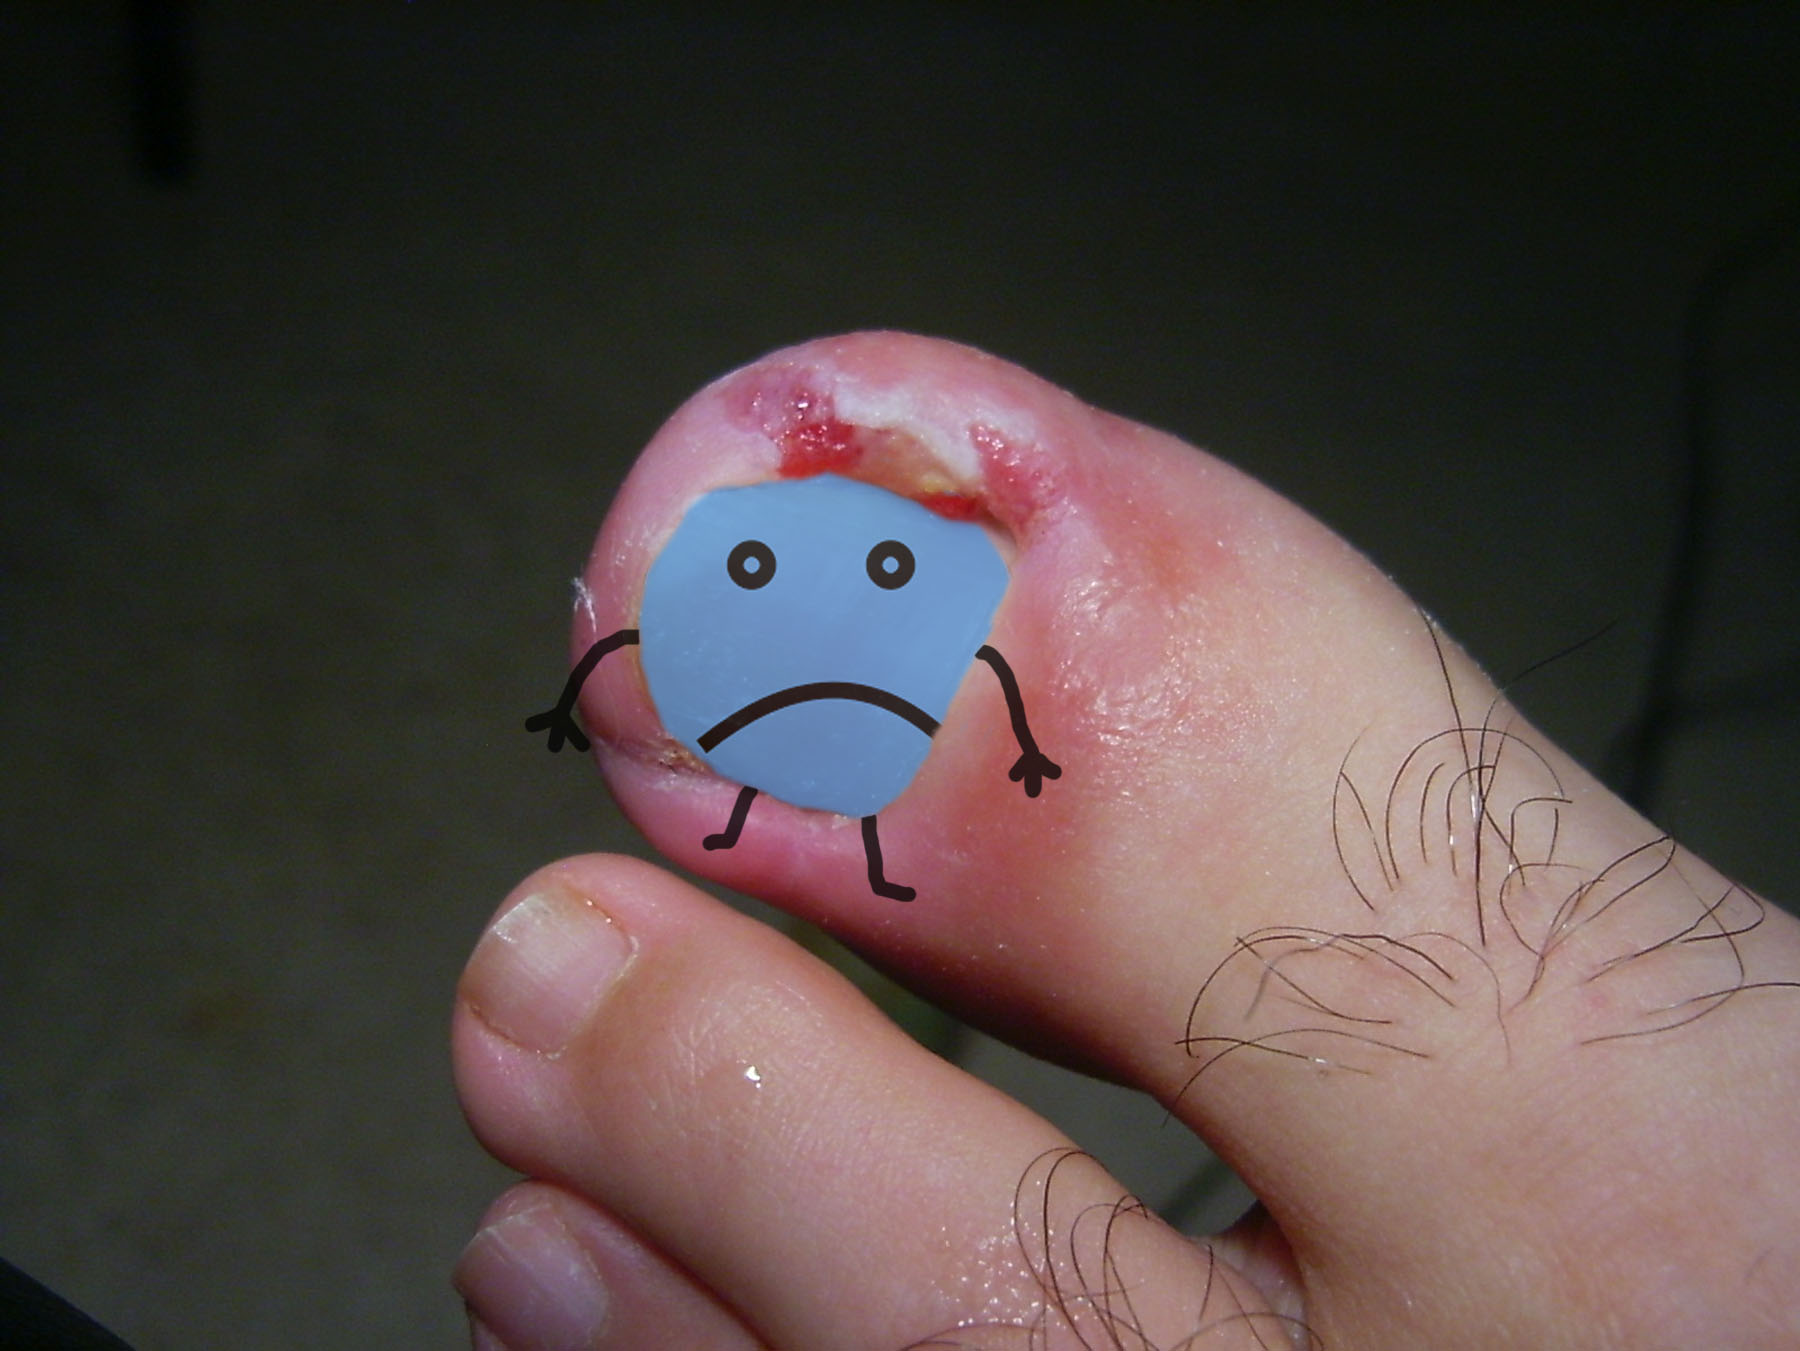 You are currently viewing The Ingrown Nail – What to do